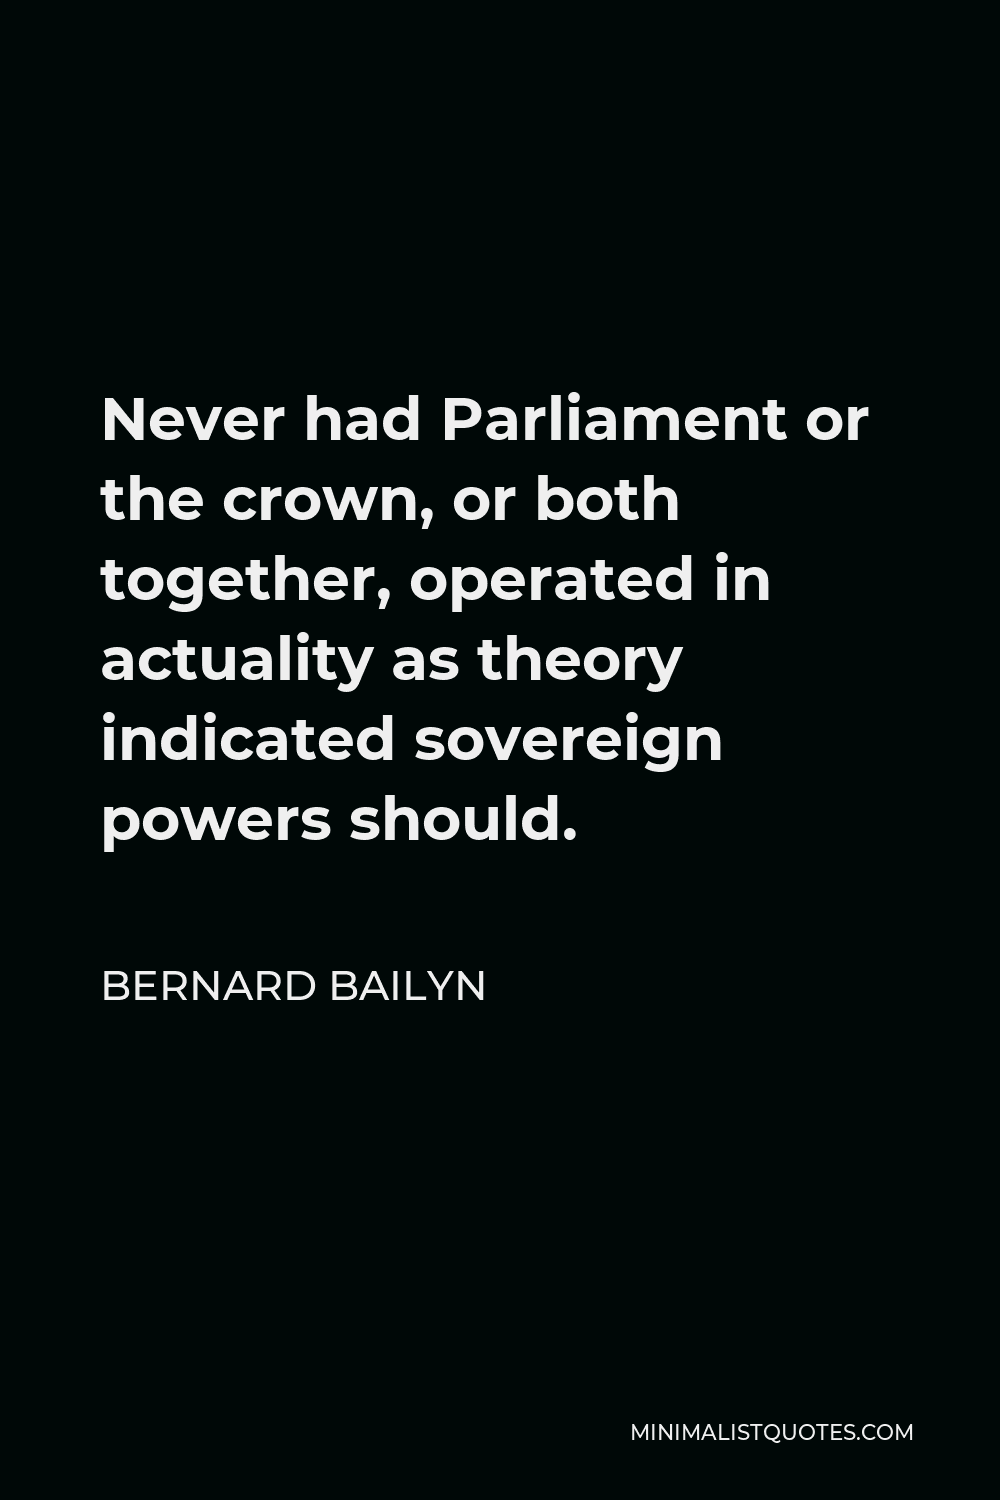 Bernard Bailyn Quote - Never had Parliament or the crown, or both together, operated in actuality as theory indicated sovereign powers should.